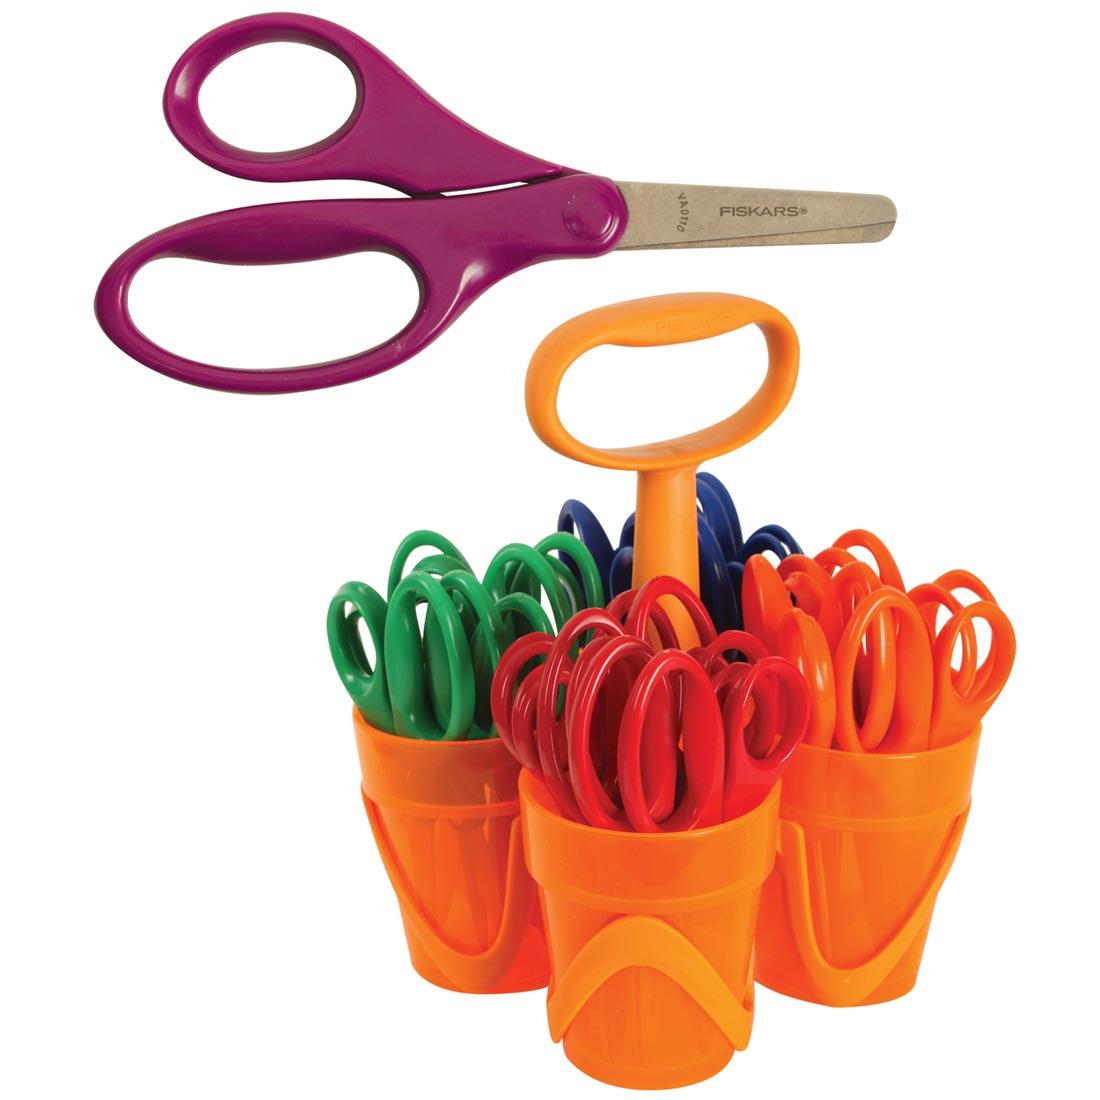 Fiskars for Kids Blunt Scissors Premium Class Pack with a closeup of one pair